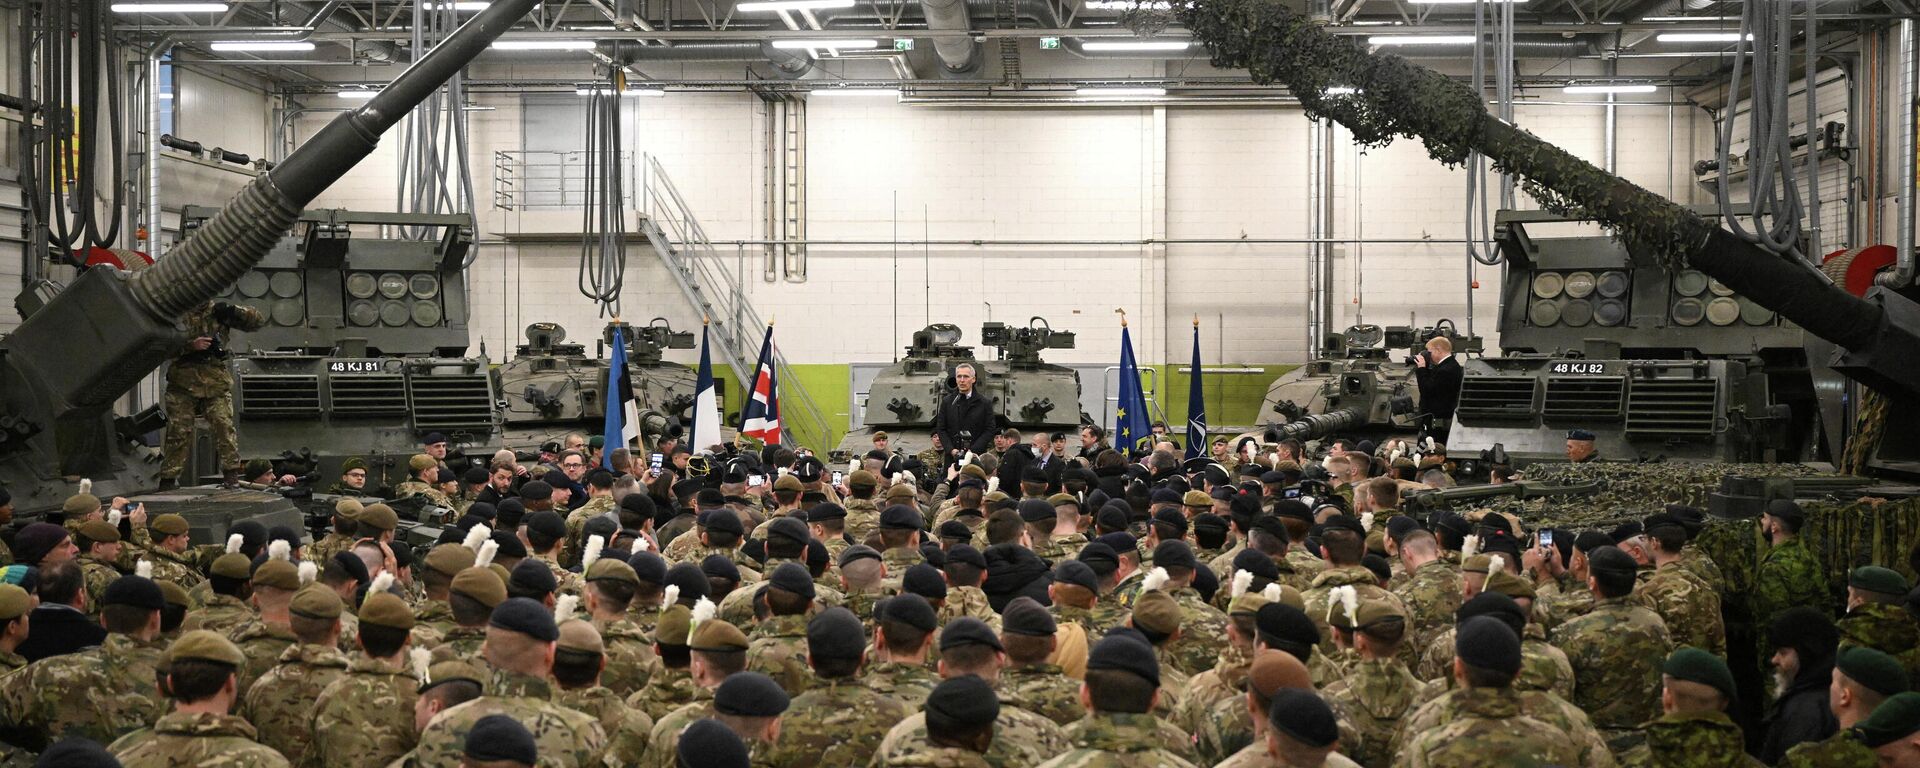 NATO Secretary-General Jens Stoltenberg meets NATO troops after a joint press conference at the Tapa Army Base, in Tallinn, Estonia March 1, 2022 - Sputnik International, 1920, 02.03.2022